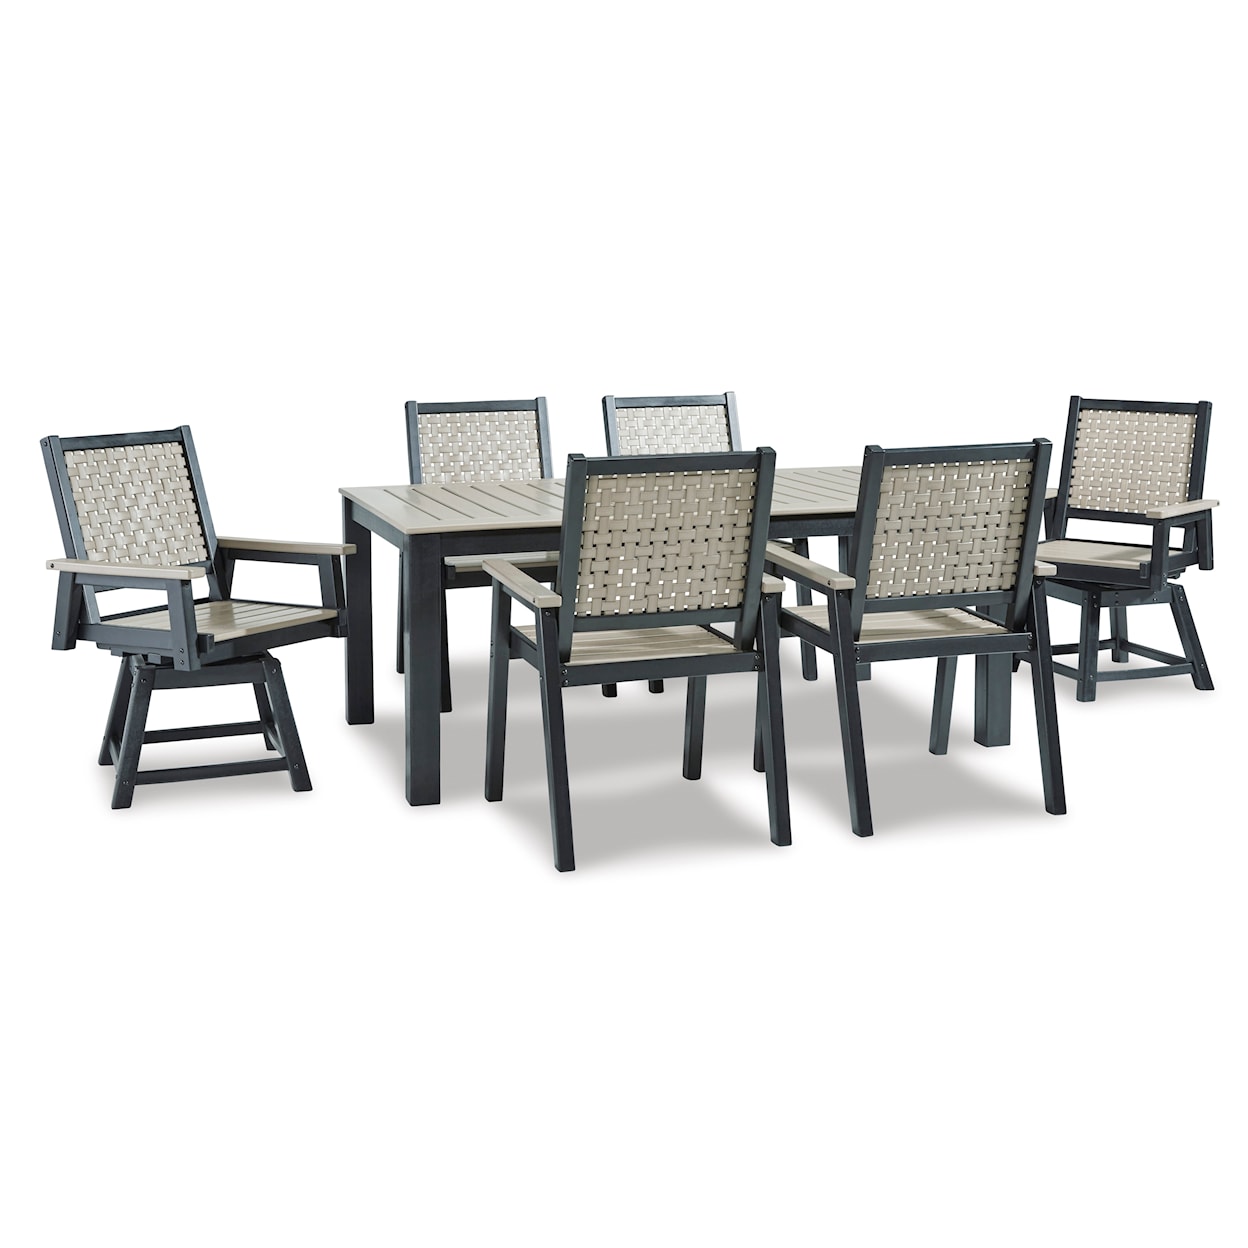 Signature Design by Ashley Mount Valley Contemporary Outdoor Dining Set